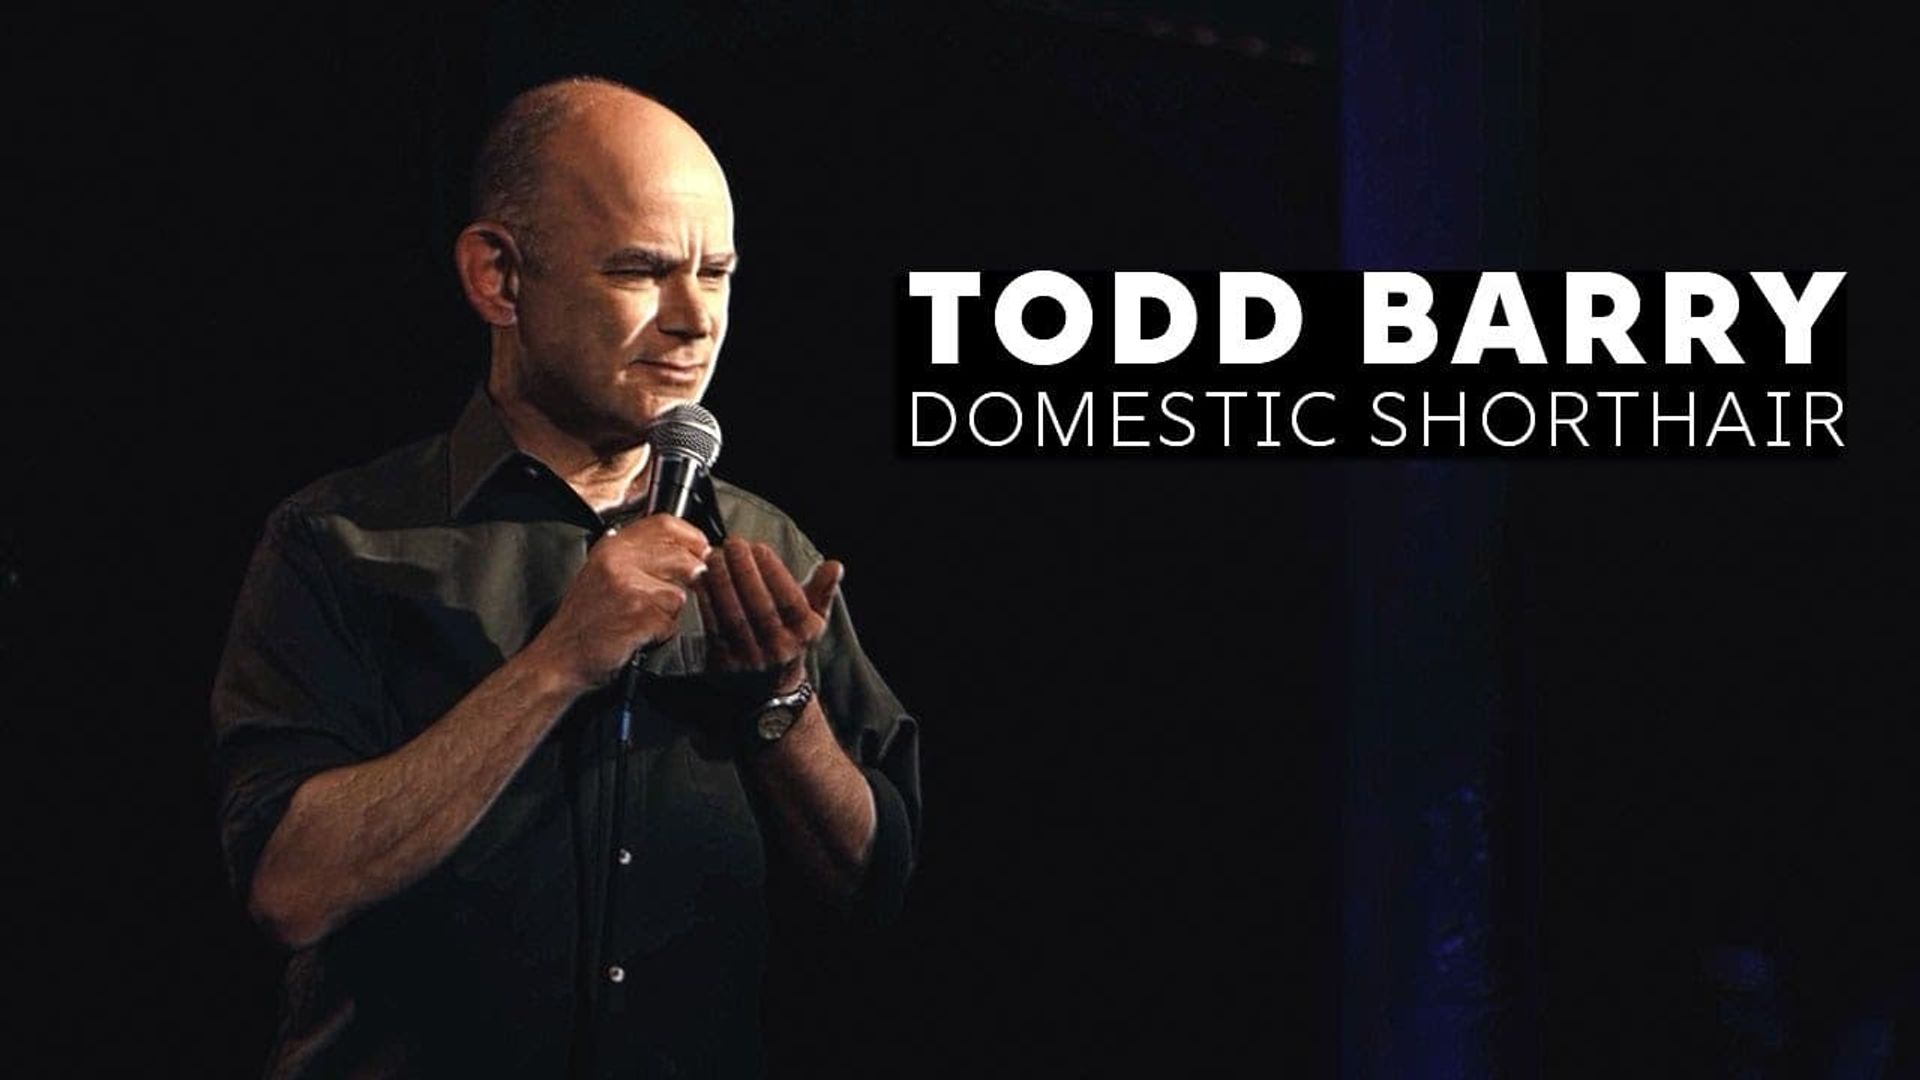 Todd Barry: Domestic Shorthair background